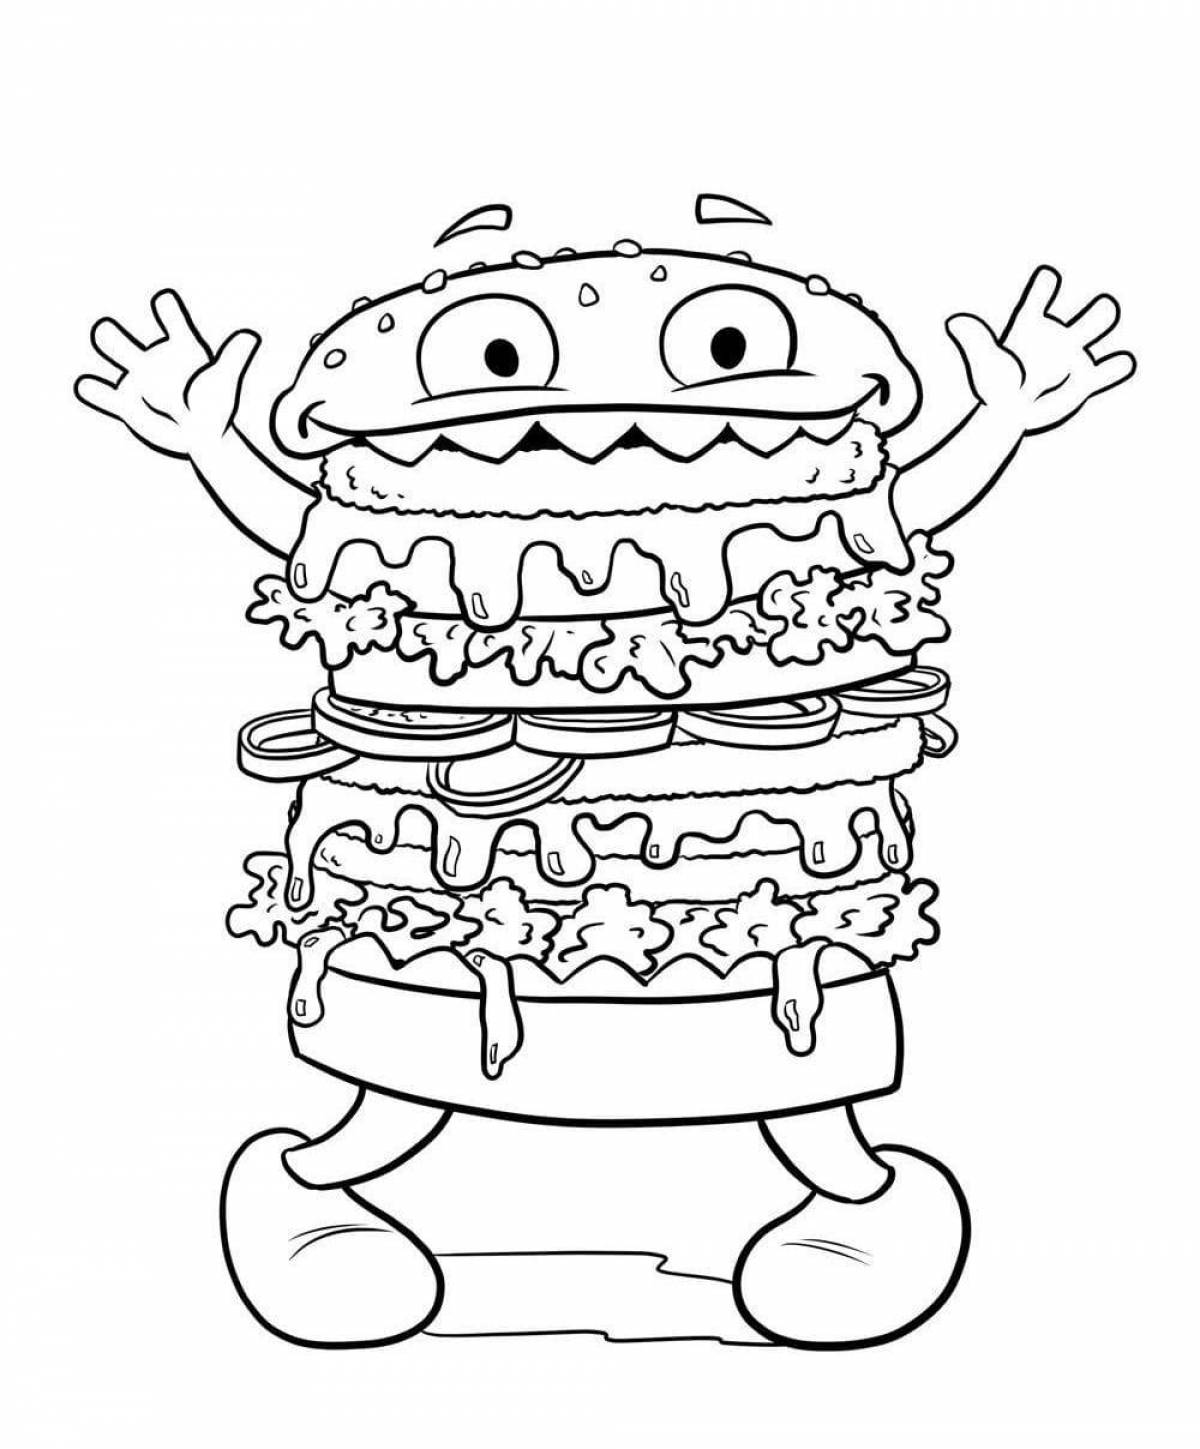 Tempting burger coloring page